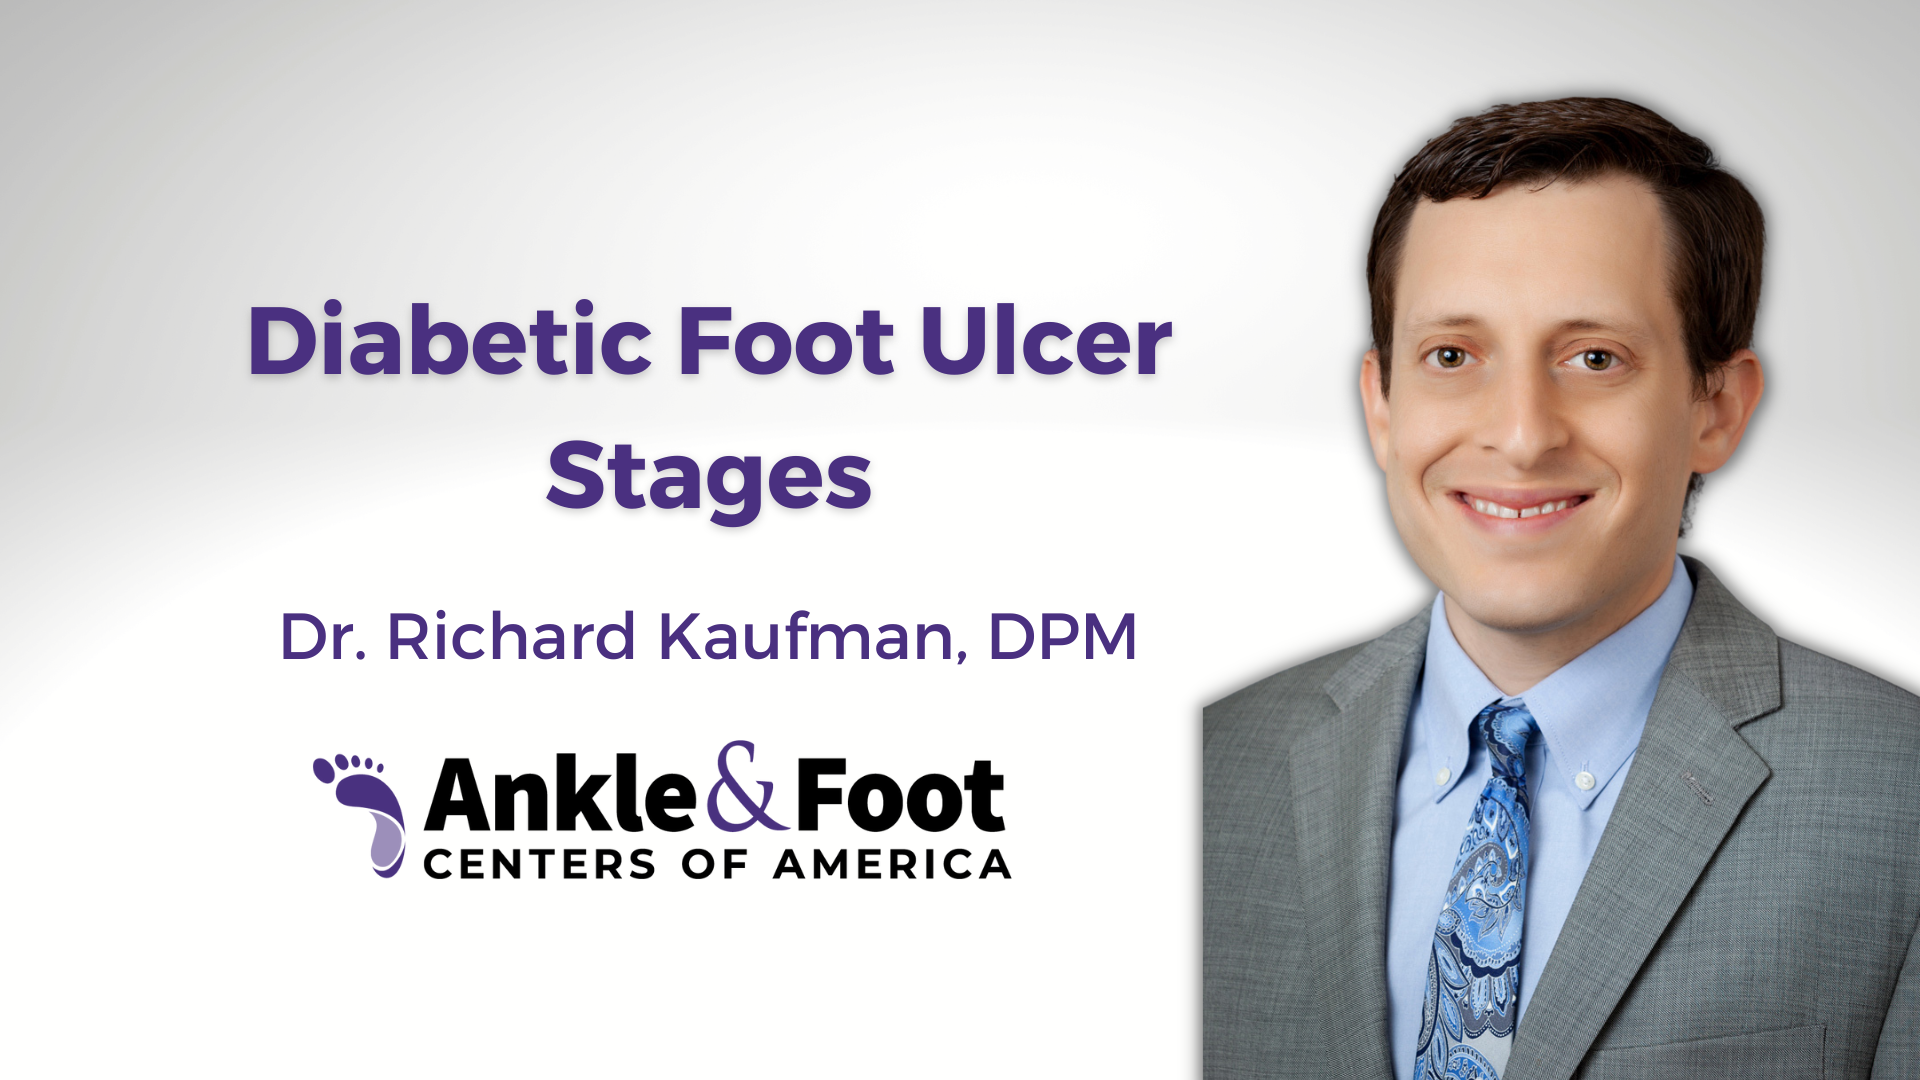 Stages of Diabetic Foot Ulcers